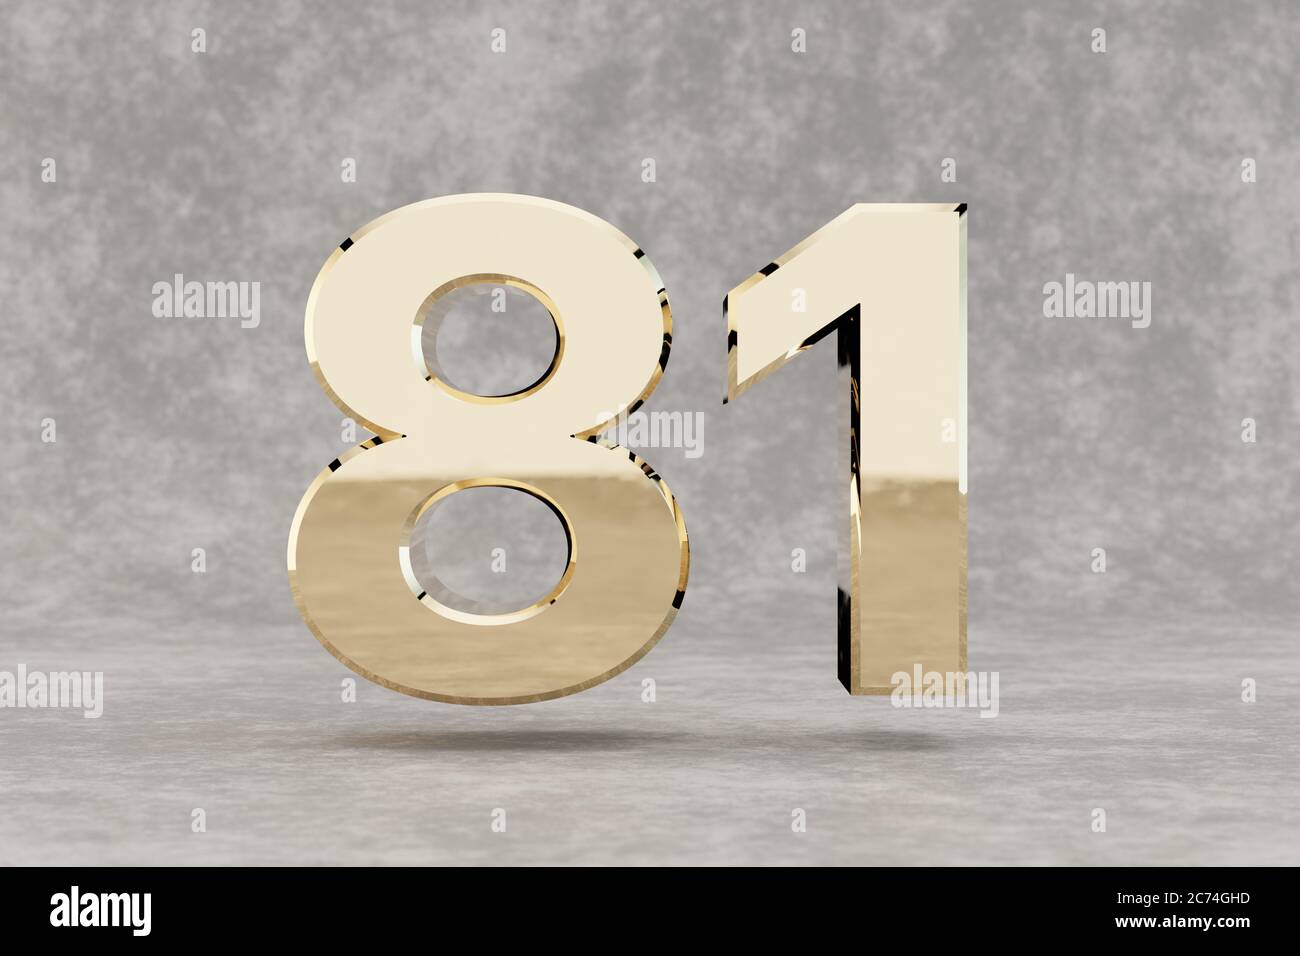 Gold 3d number 81. Glossy golden number on concrete background. Metallic digit with studio light reflections. 3d render. Stock Photo